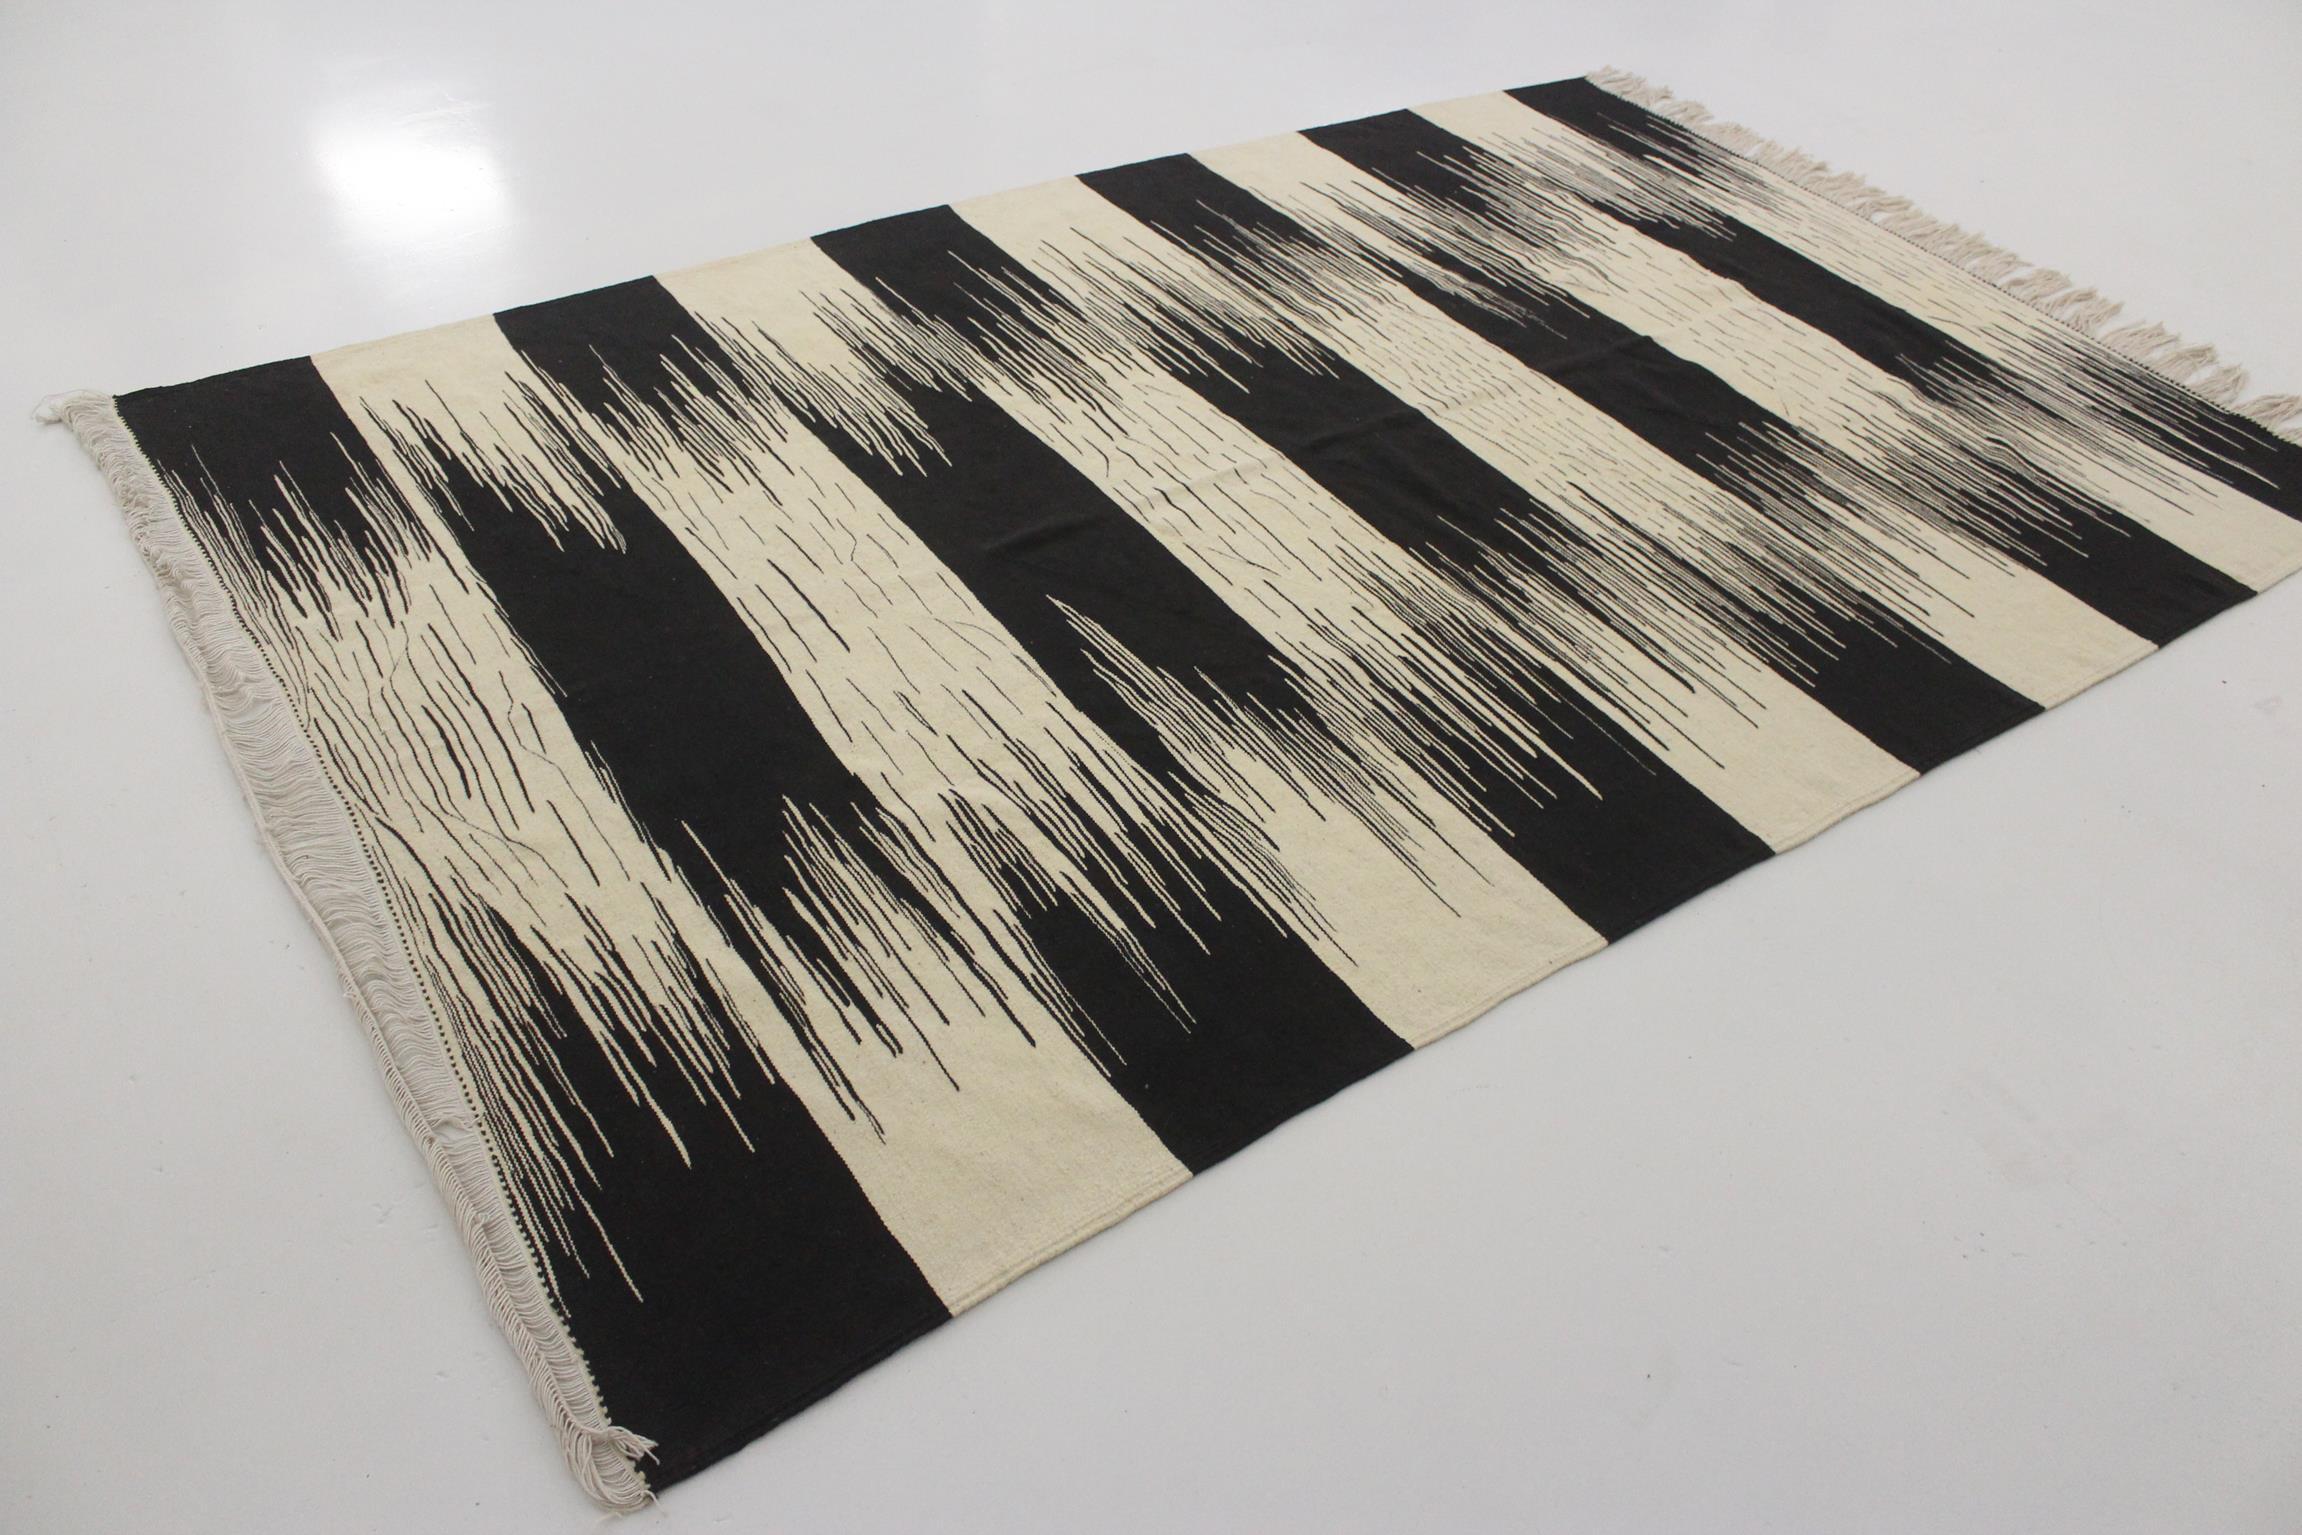 Modern Moroccan flatweave Akhnif rug - Black and white - 6.1x9.4feet / 186x287cm In Excellent Condition For Sale In Marrakech, MA